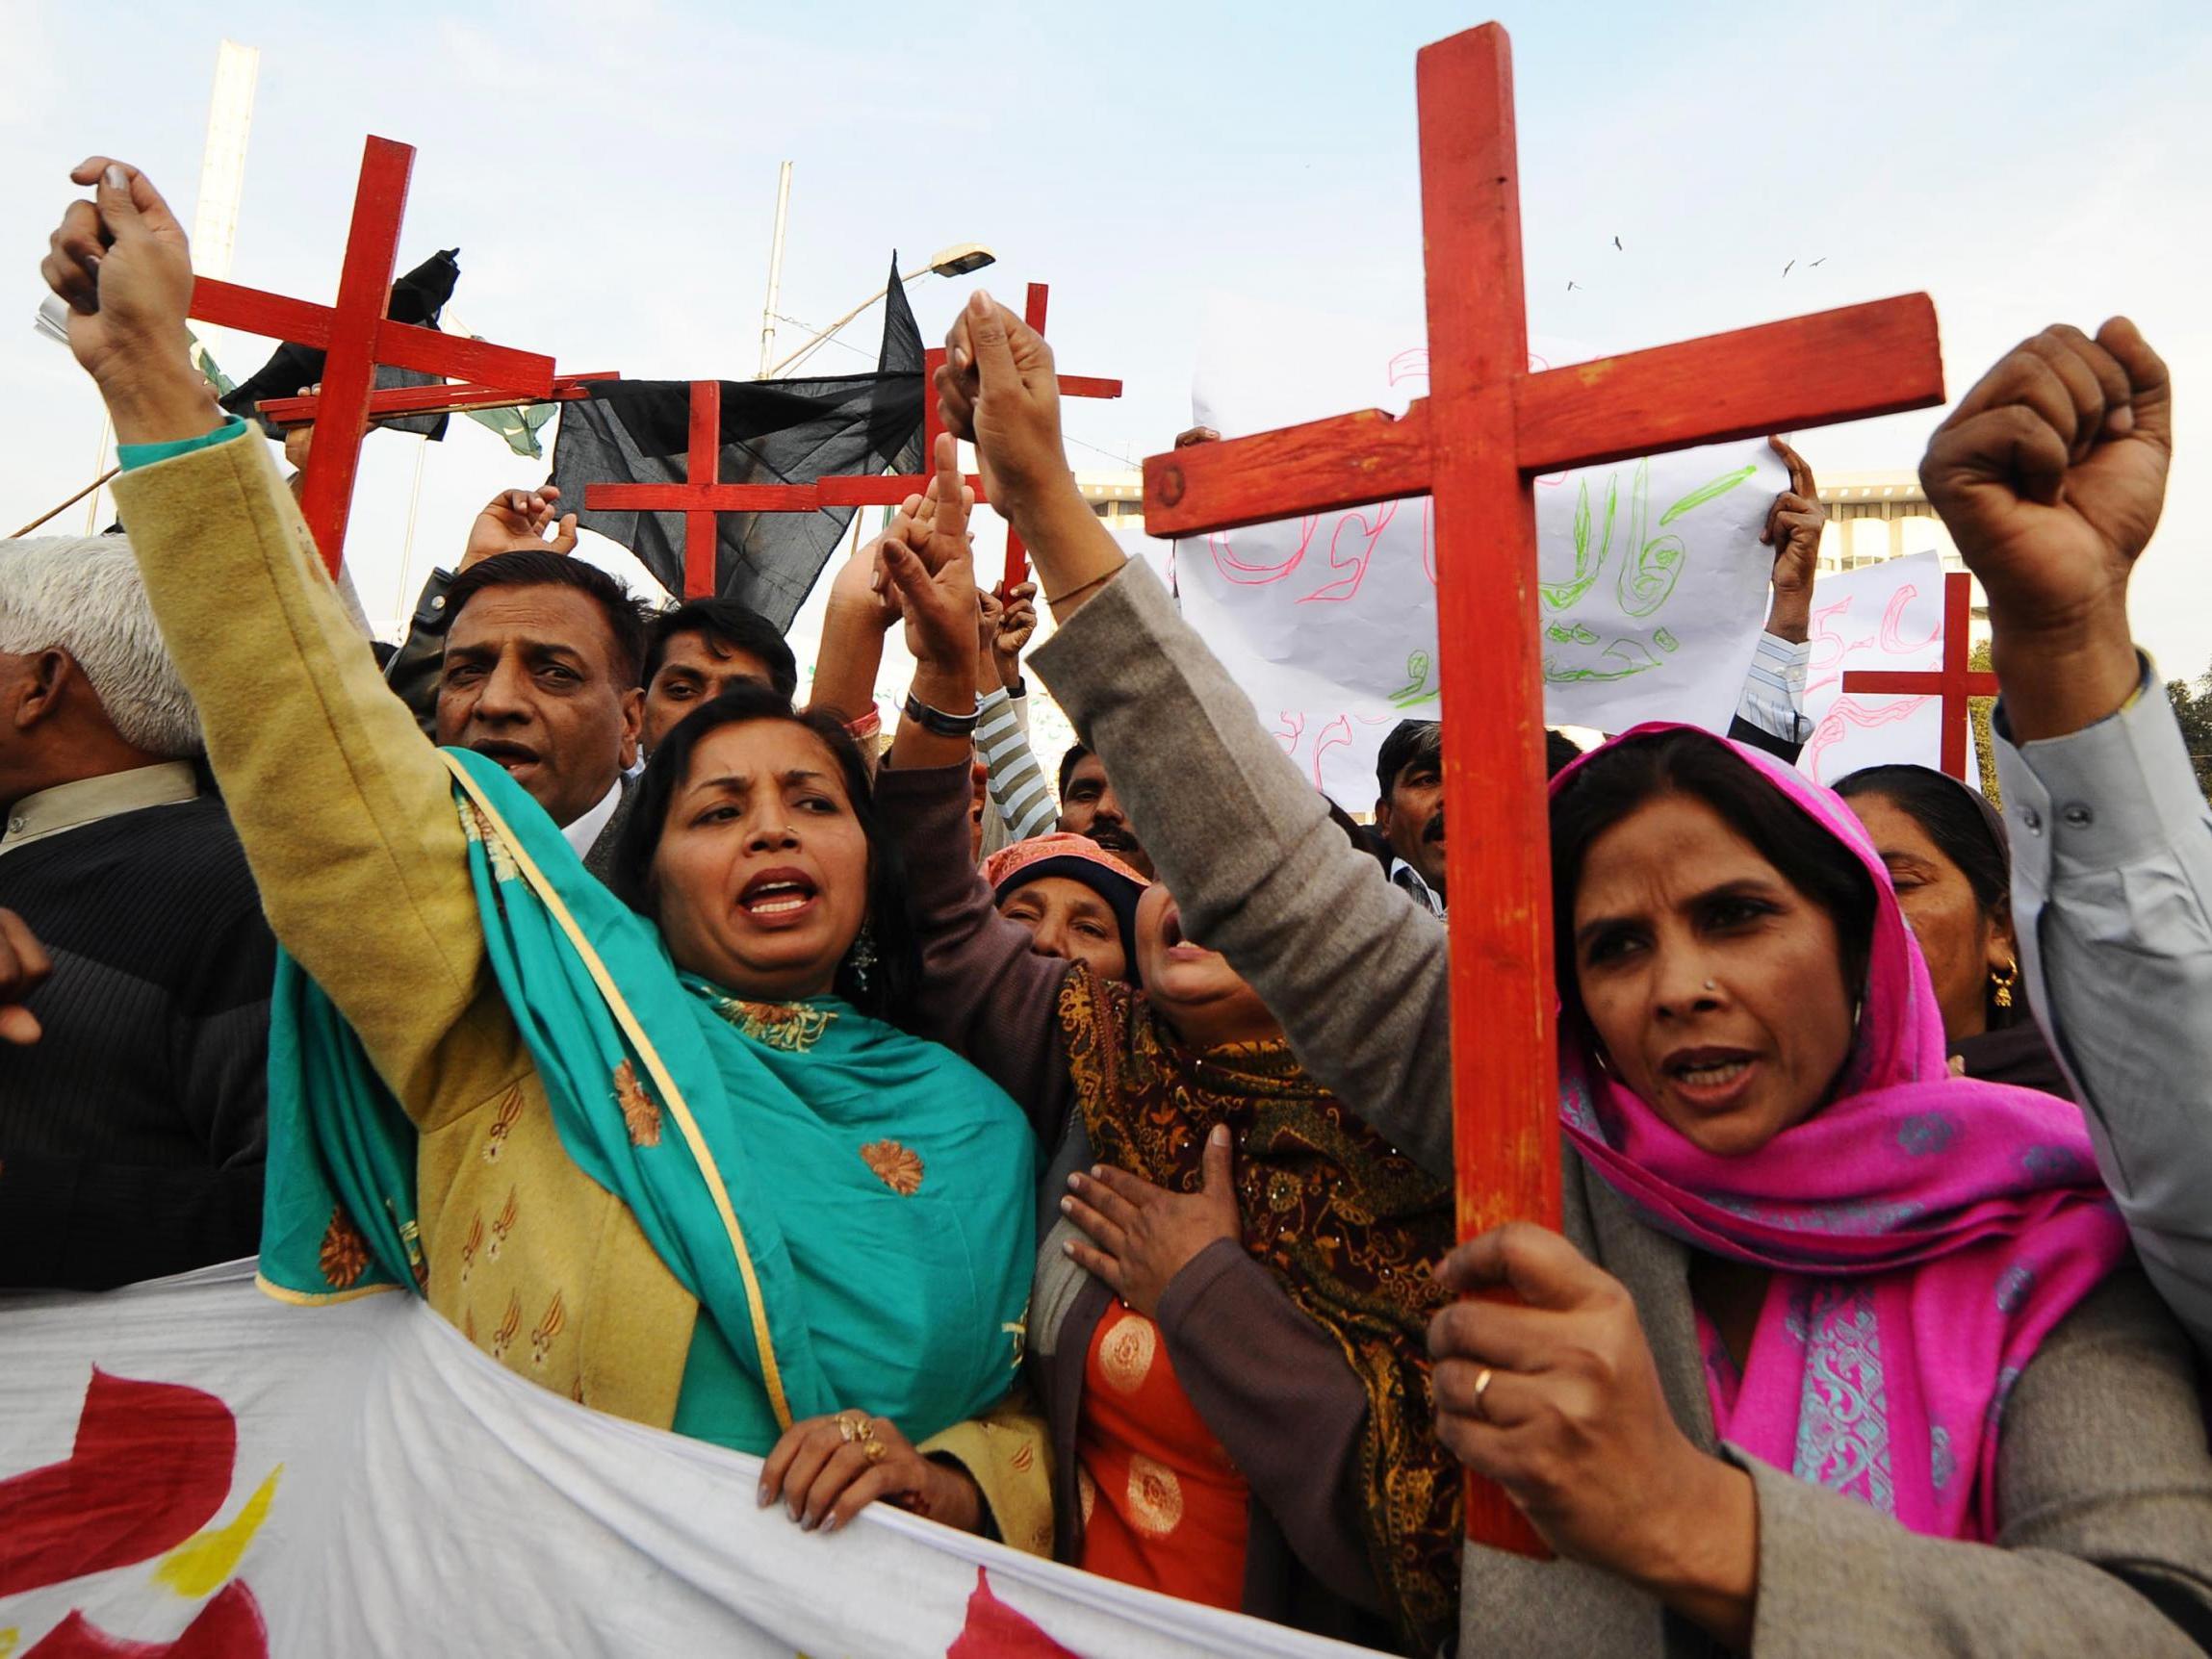 The Pakistan Christian Democratic alliance marching in support of Asia Bibi in 2010